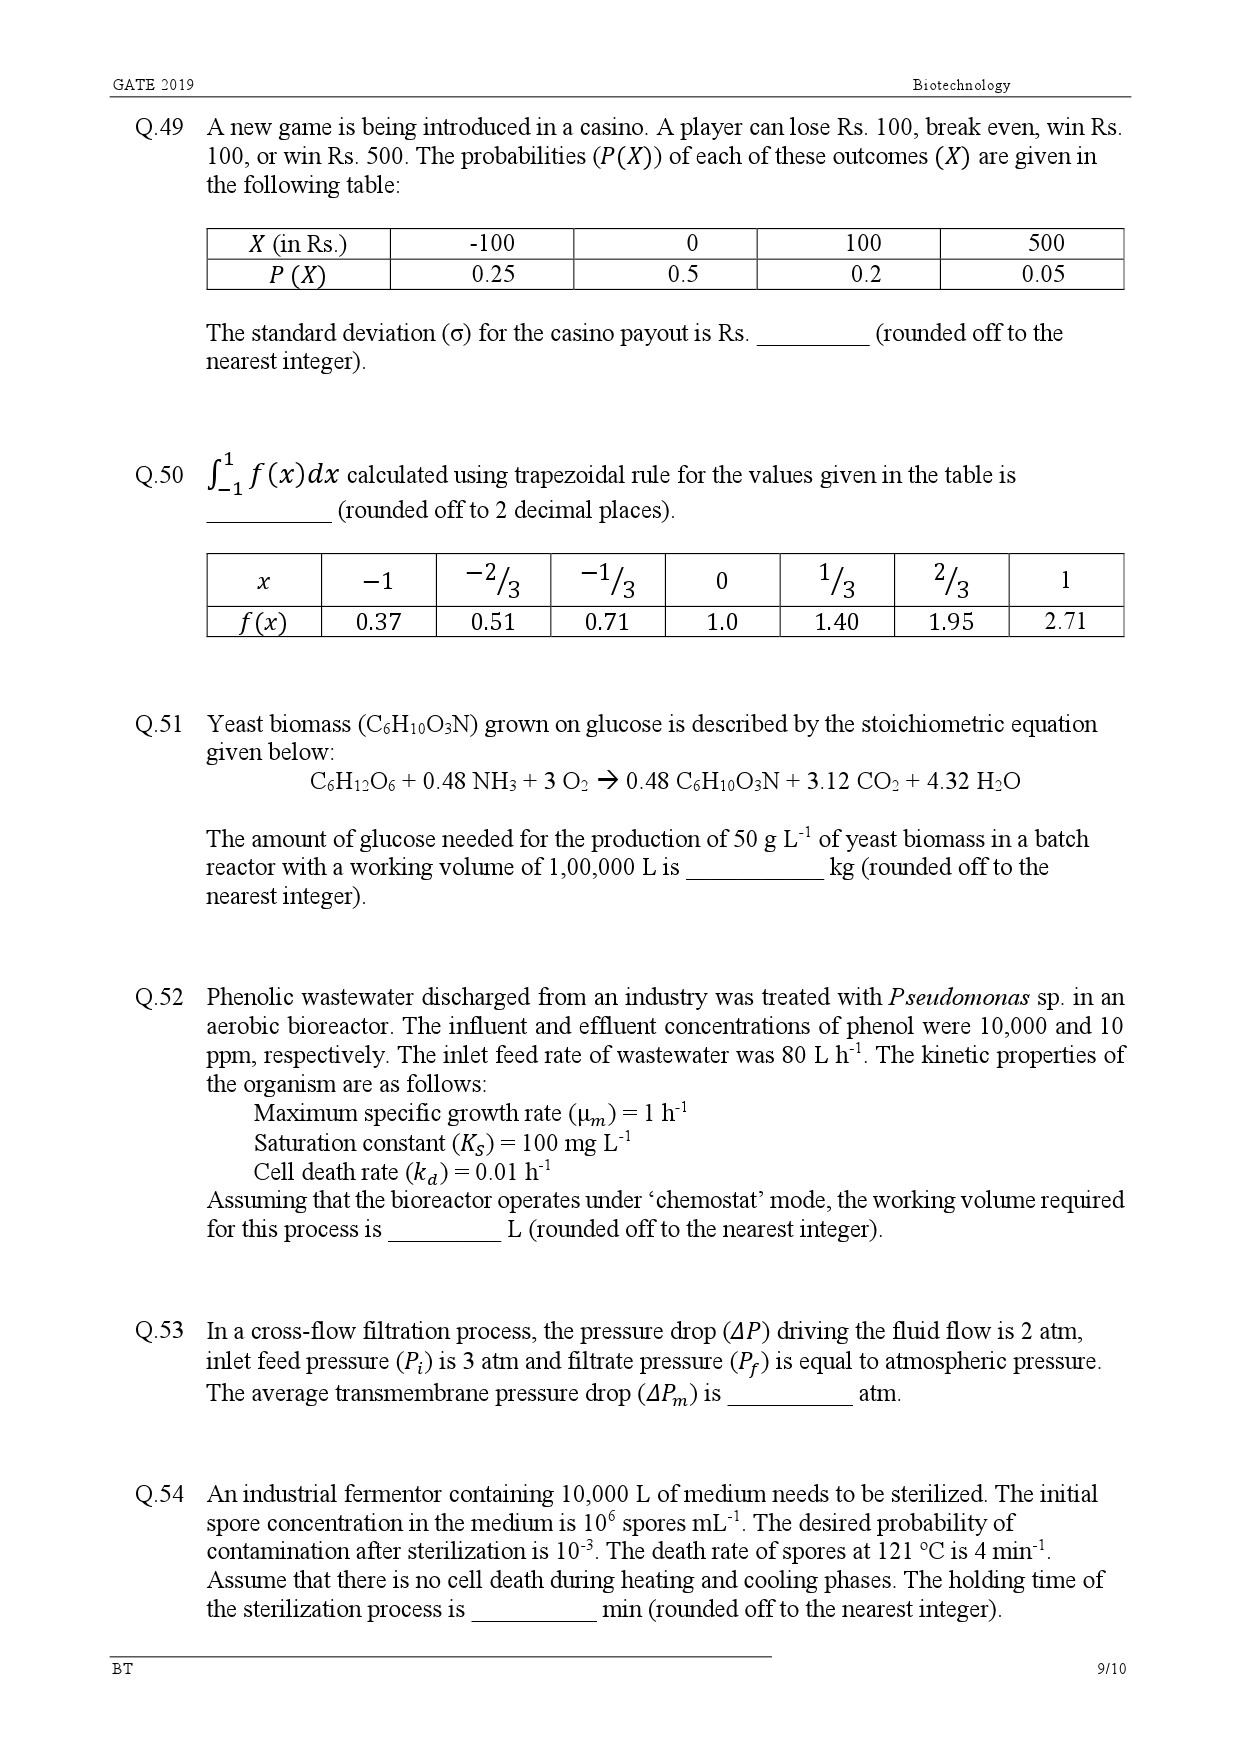 GATE Exam Question Paper 2019 Biotechnology 12